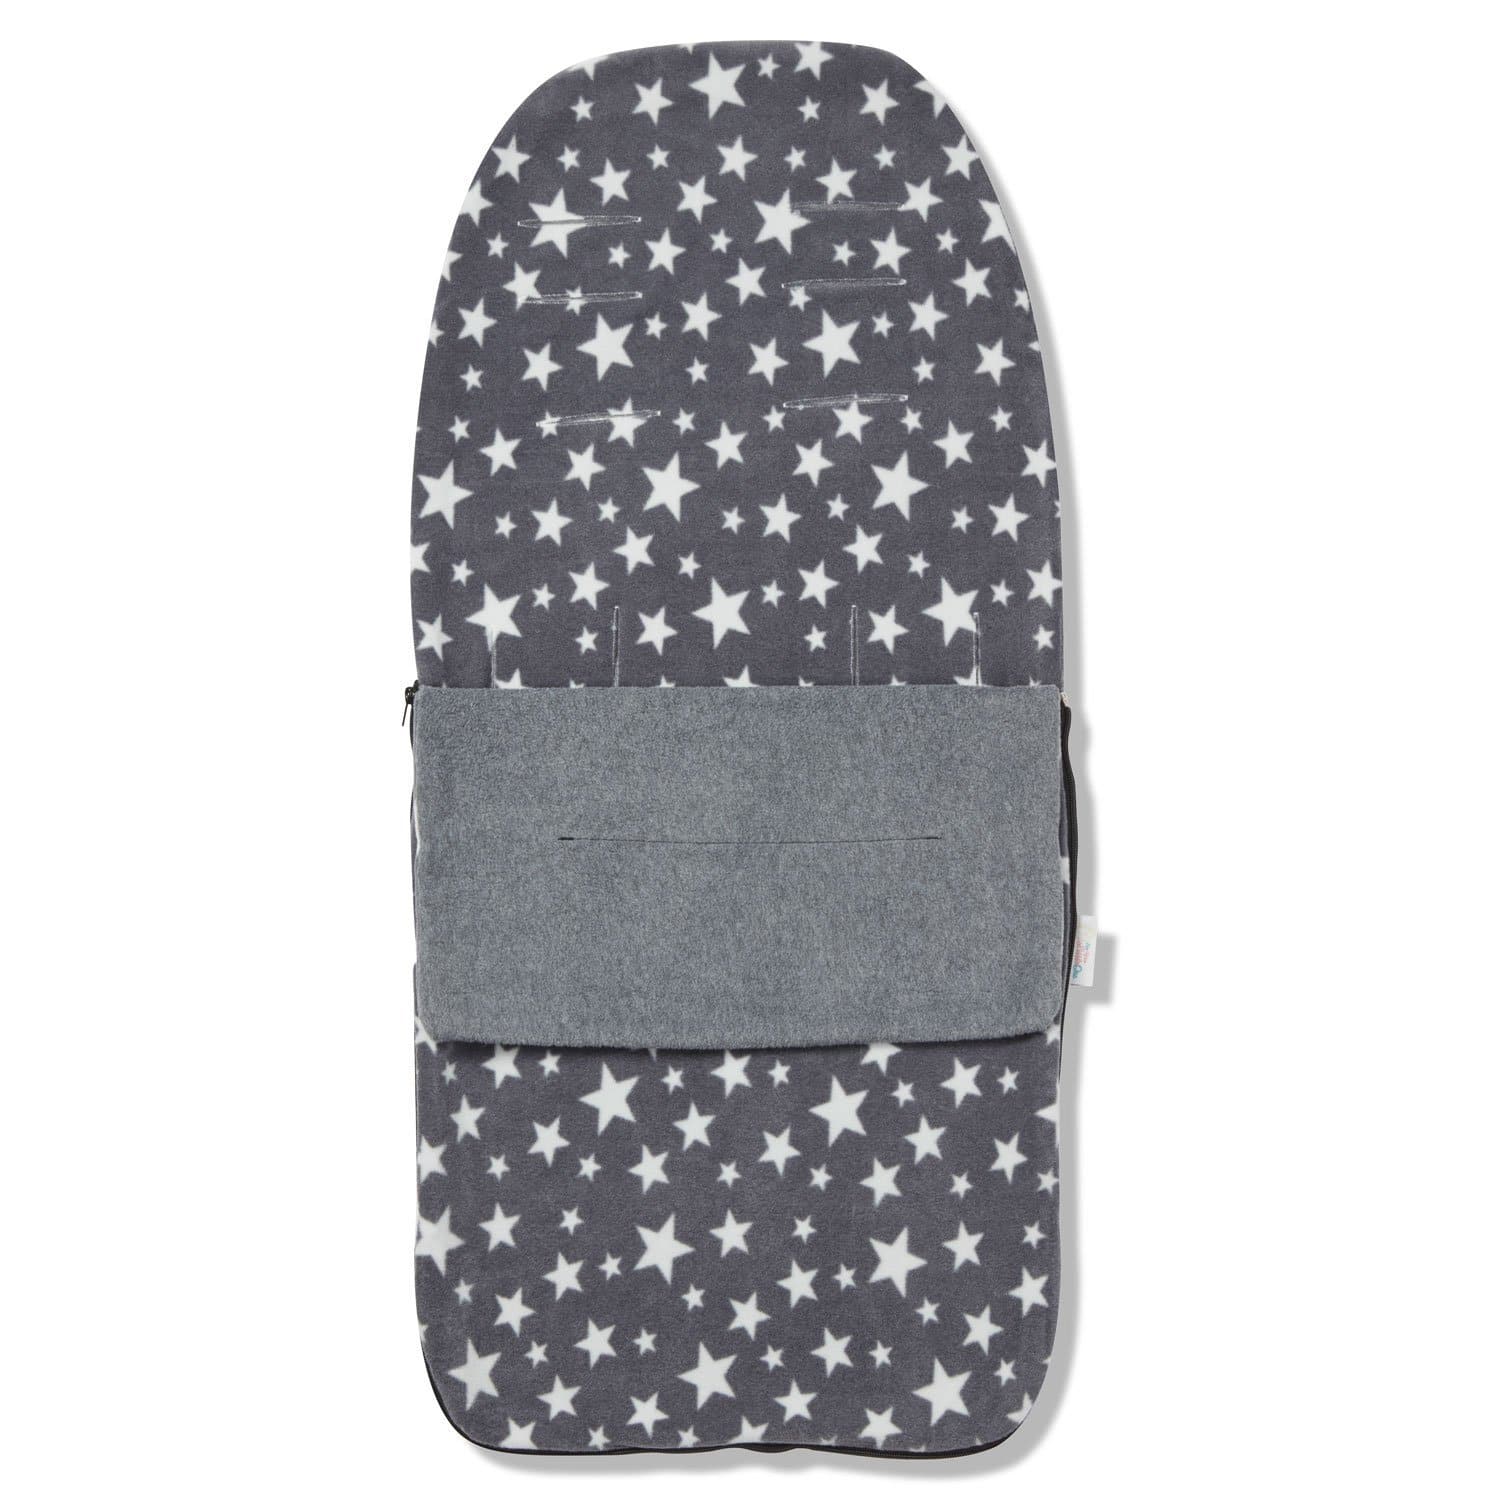 Snuggle Summer Footmuff Compatible with ABC Design - Grey Star / Fits All Models | For Your Little One